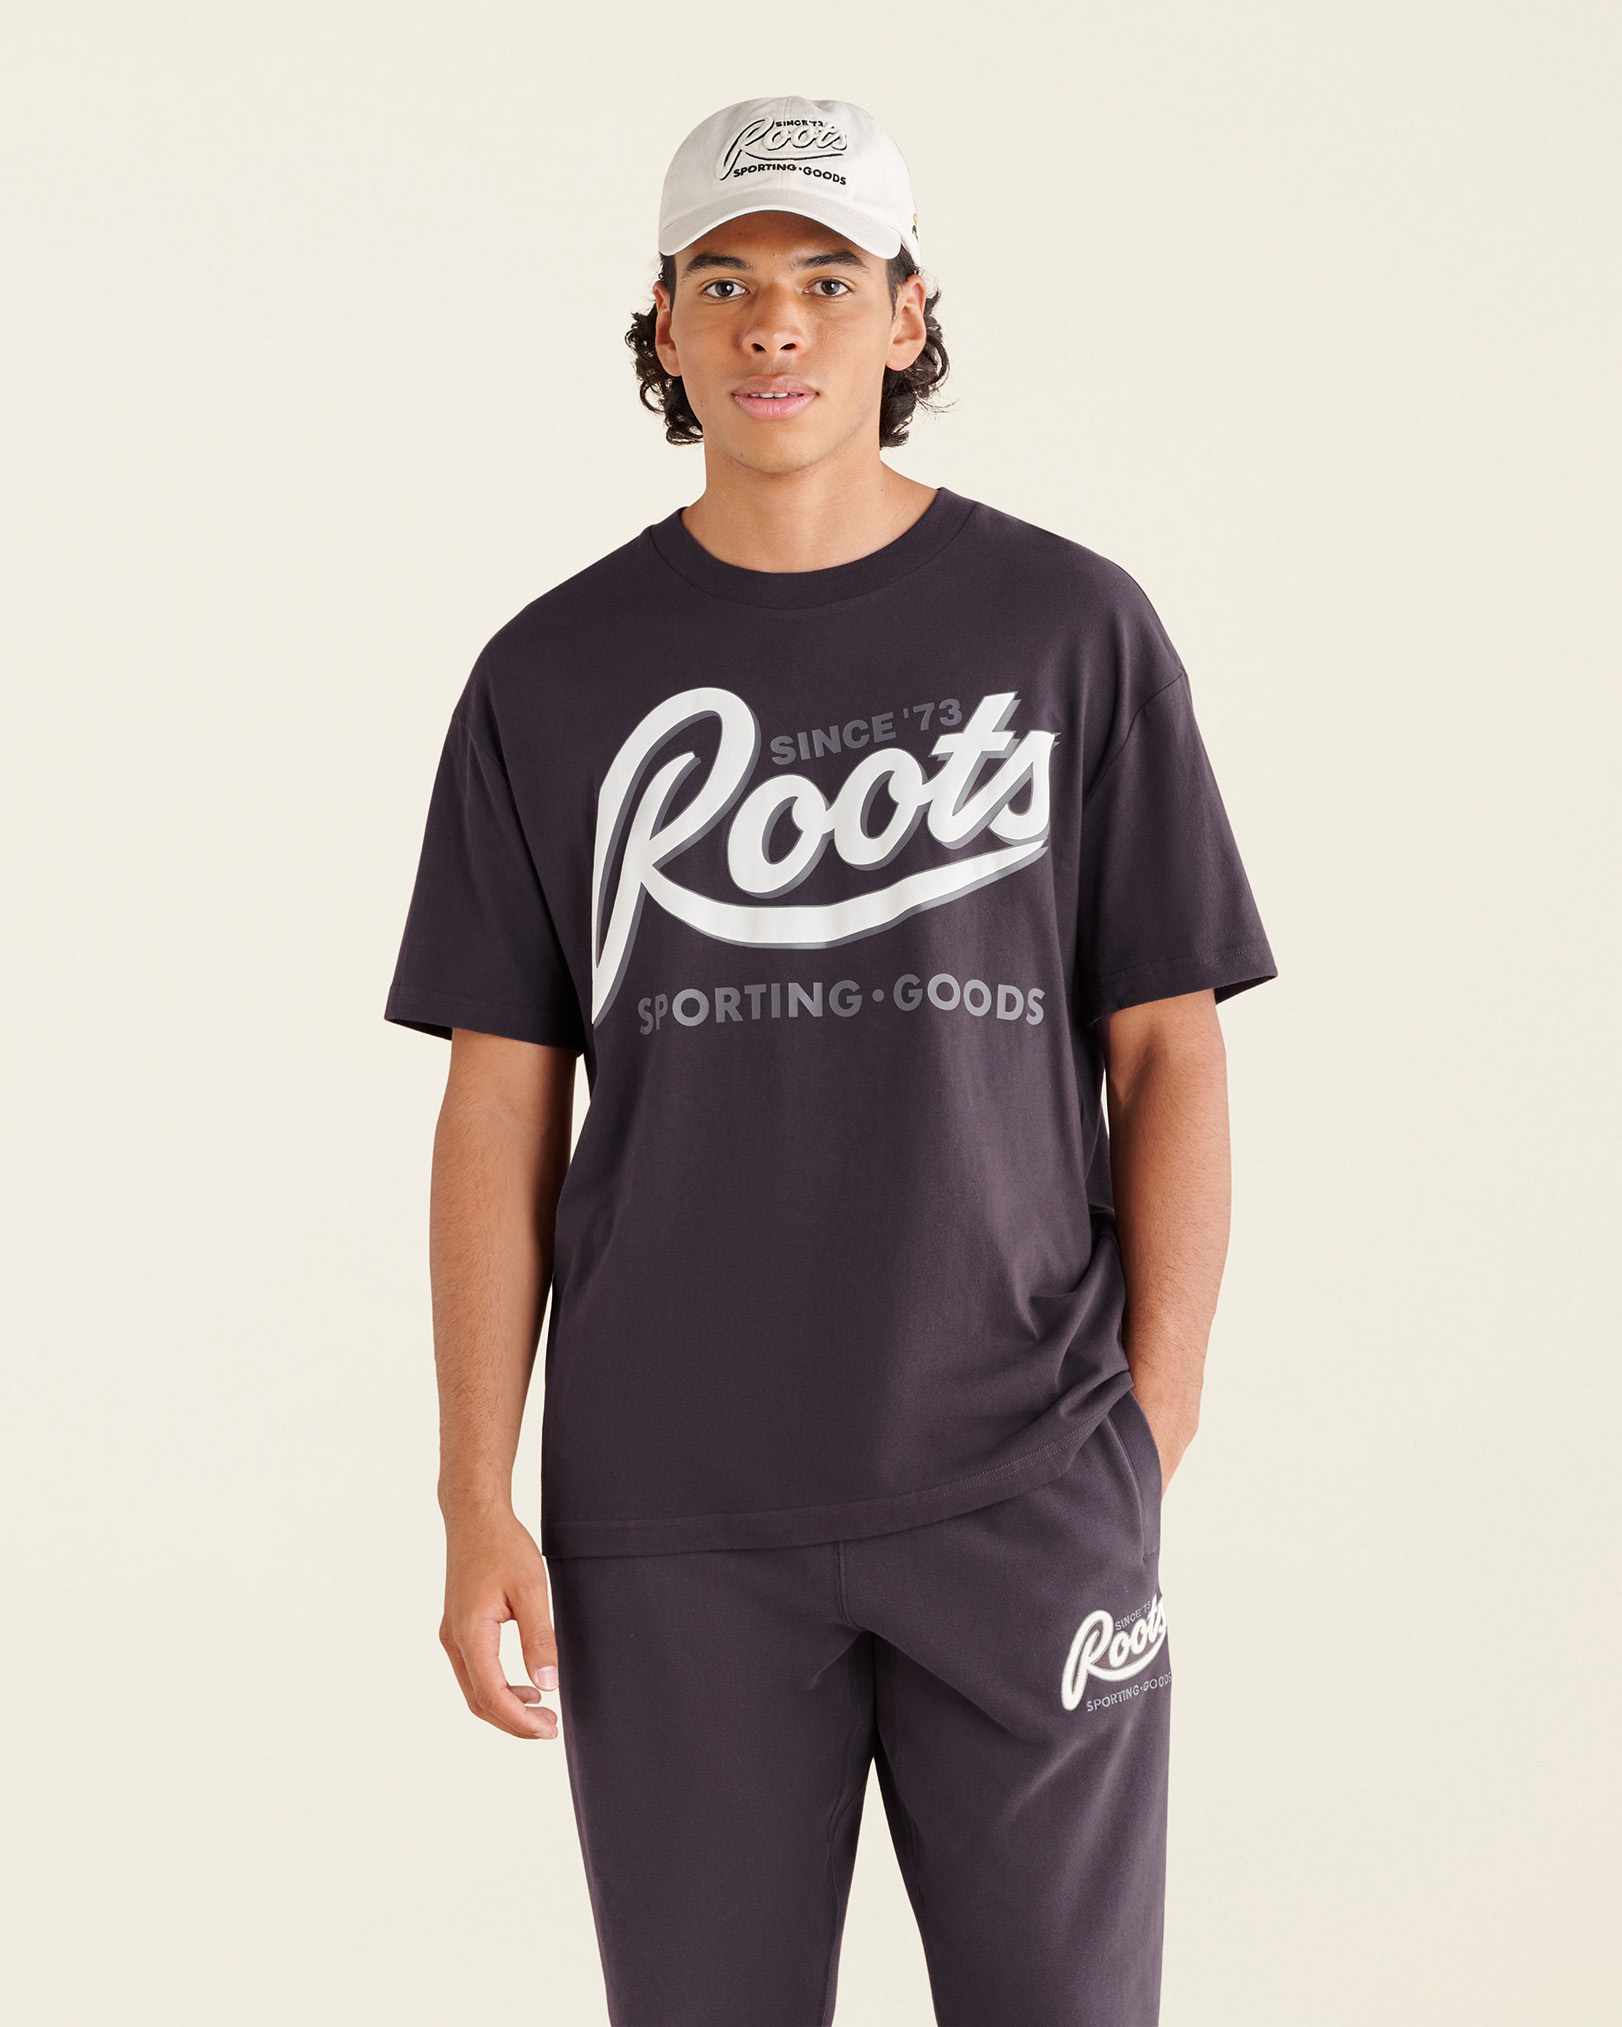 Roots Men's Sporting Goods Relaxed T-Shirt in Charcoal Black